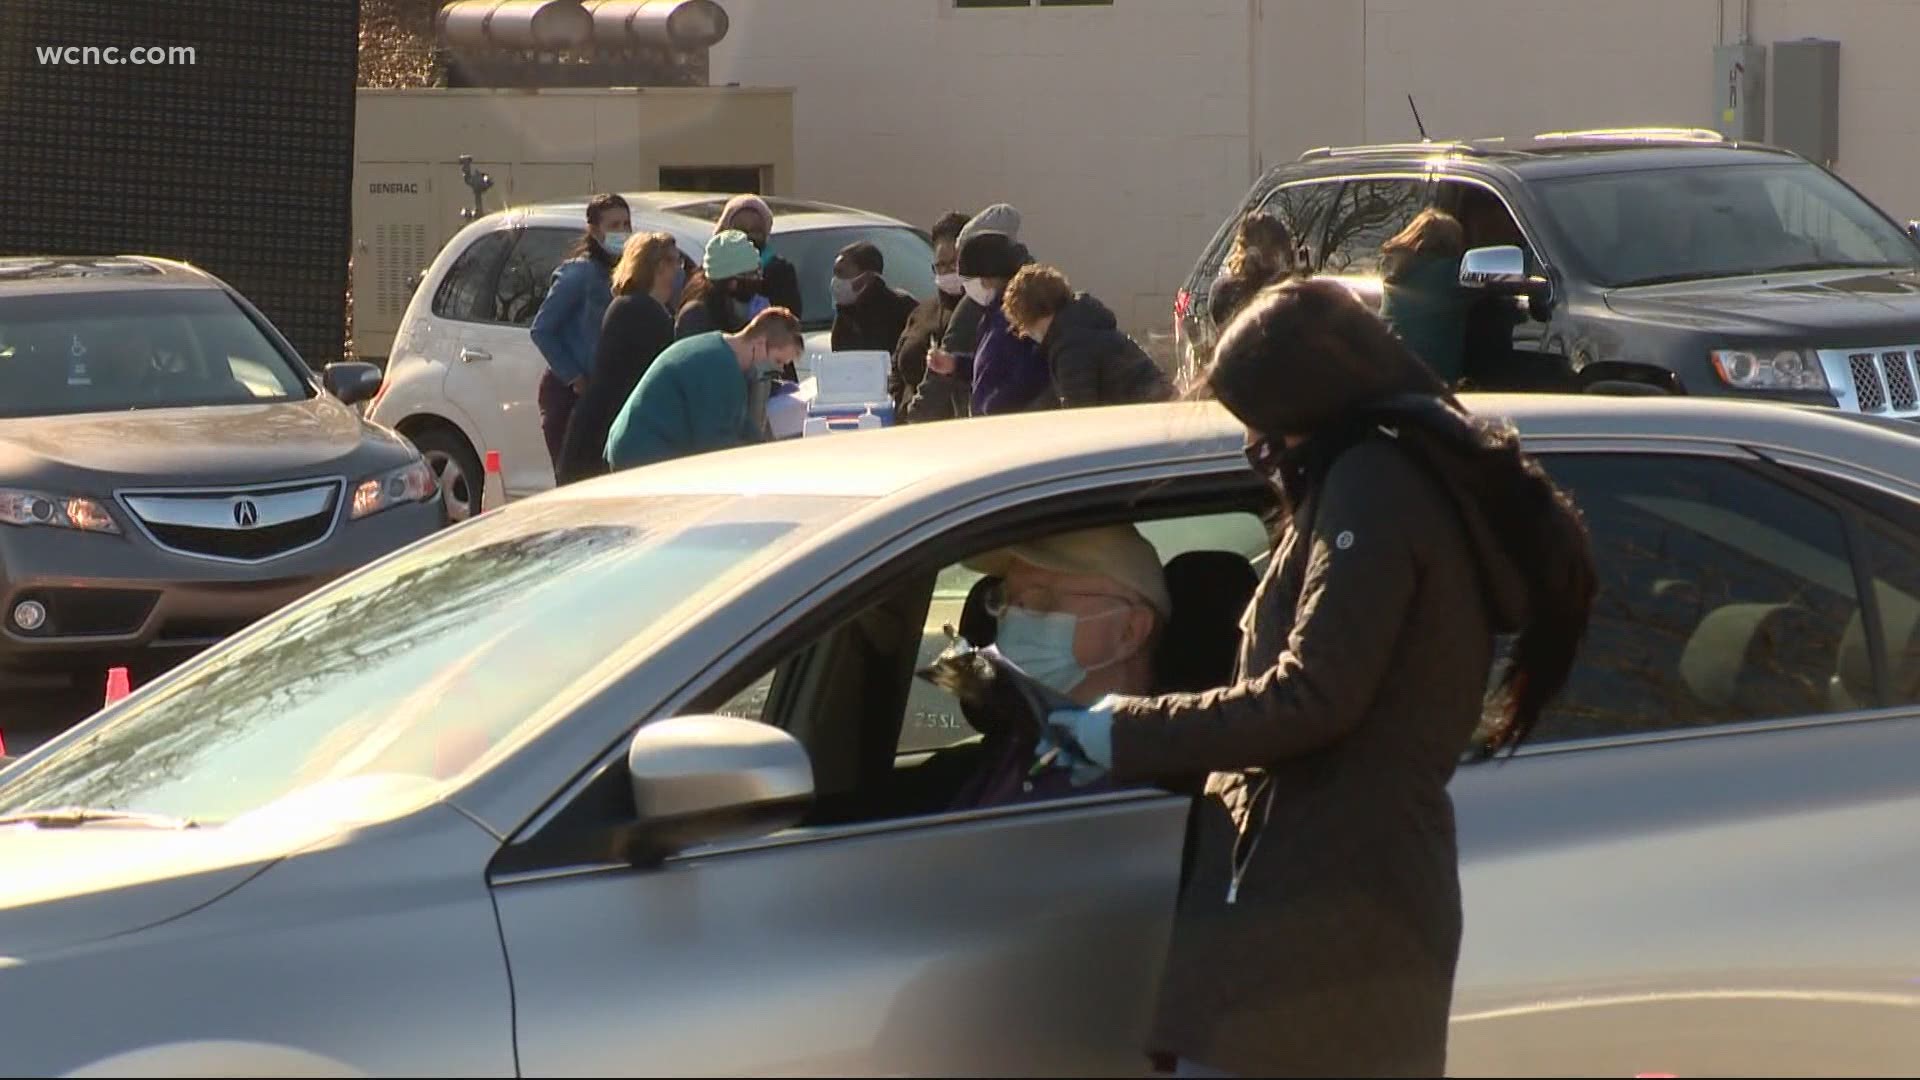 Vaccinations ended at 3:30 p.m. in Salisbury, and officials even had to turn cars away.